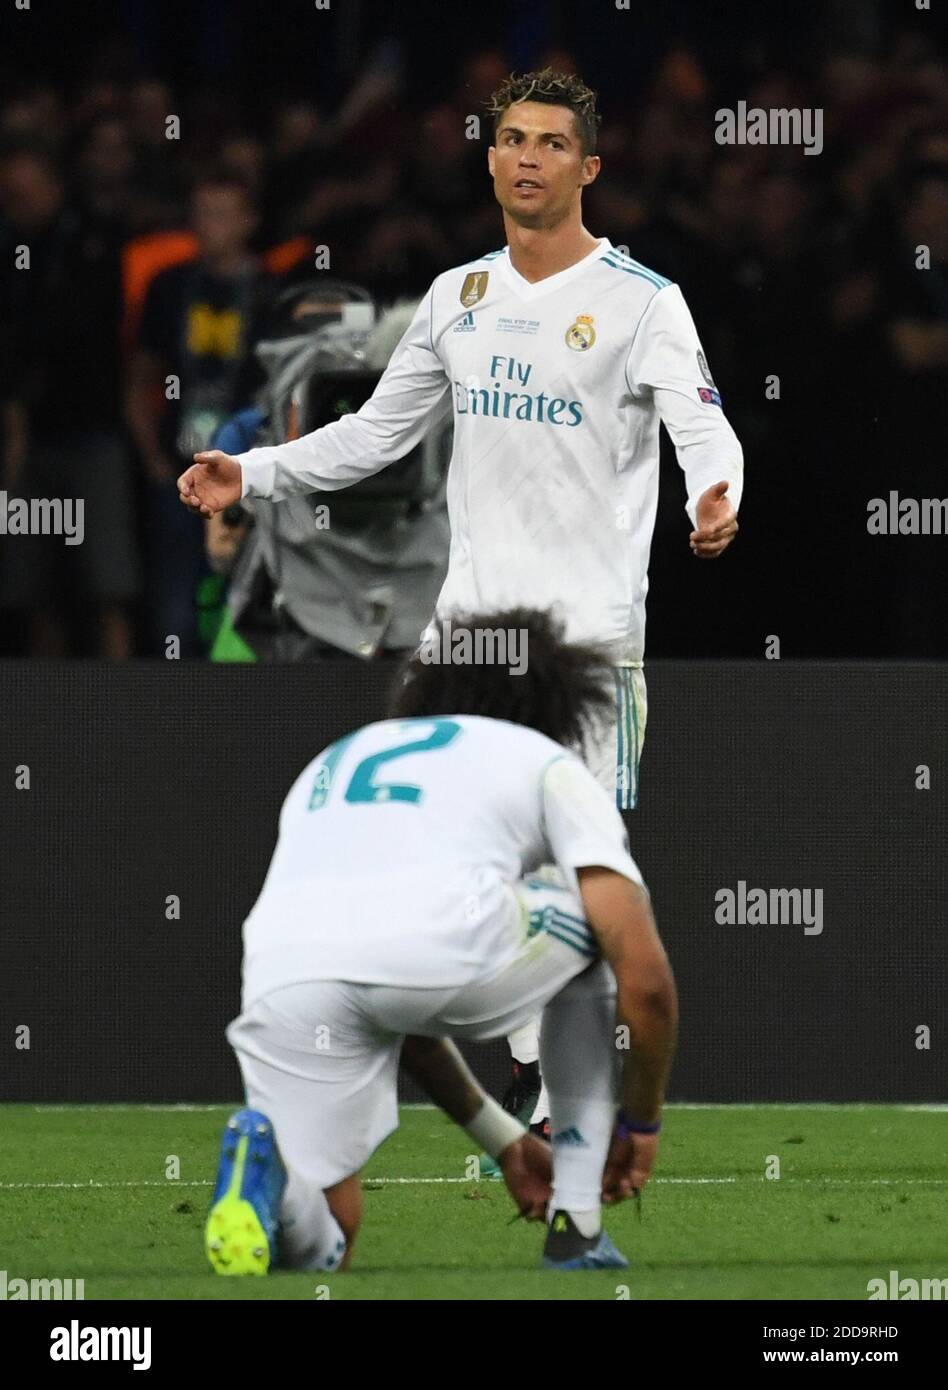 26 May 2018, Ukraine, Kiev: Champions League, Real Madrid vs FC Liverpool, finals at the Olimpiyskiy National Sports Complex. Madrid's Cristiano Ronaldo reacts to a missed chance of scoring. Photo by Ina Fassbender/DPA/ABACAPRESS.COM Stock Photo